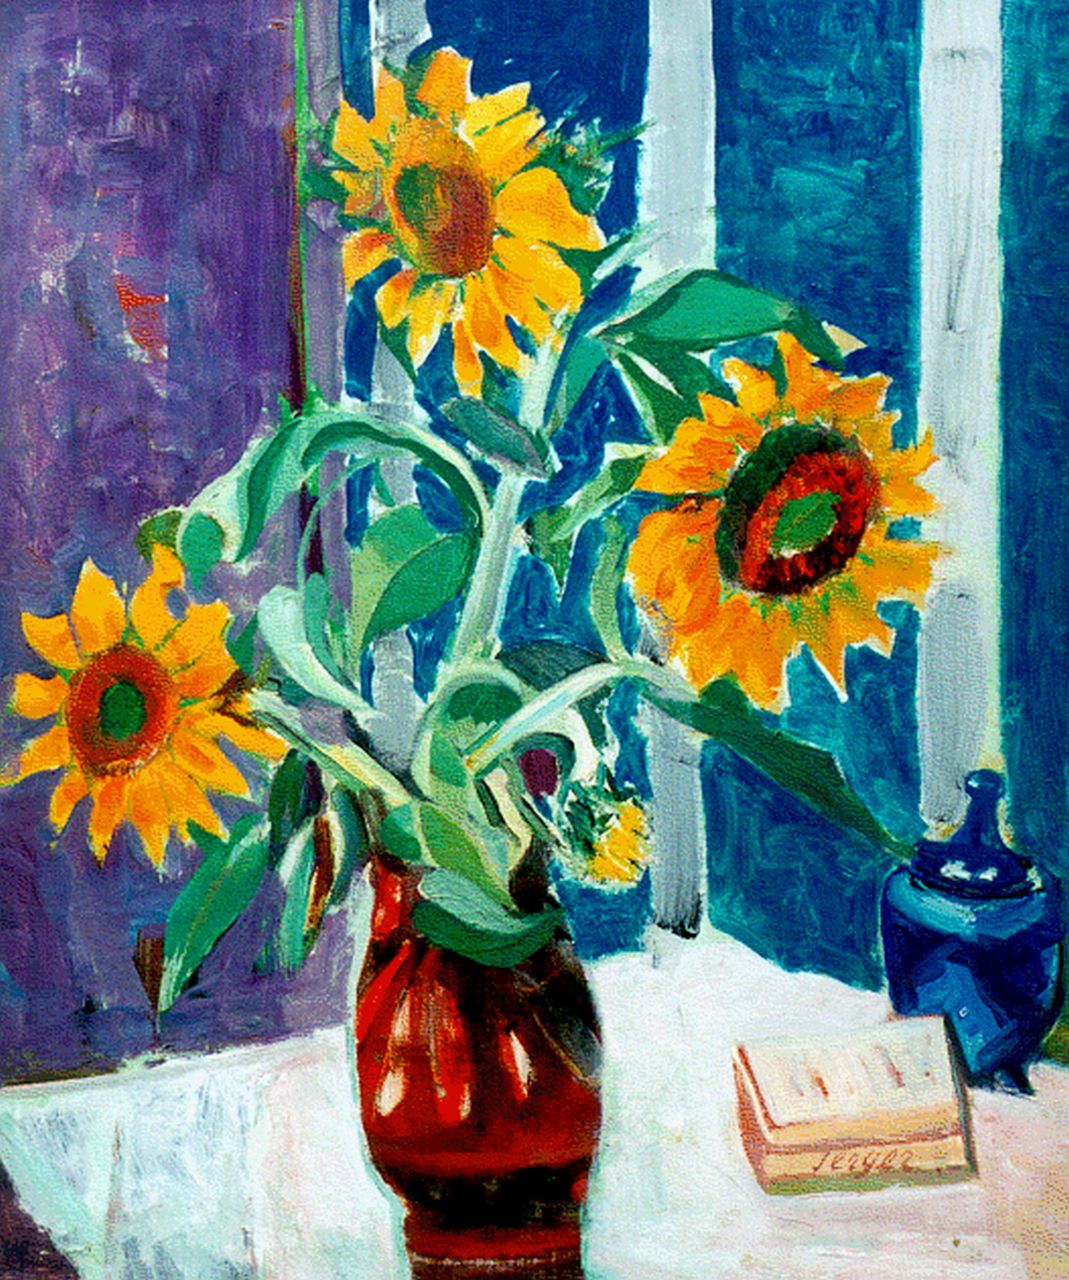 Serger F.B.  | Frederick Bedrich Serger, Sunflowers, oil on canvas 61.2 x 51.2 cm, signed l.r. and painted before 1939